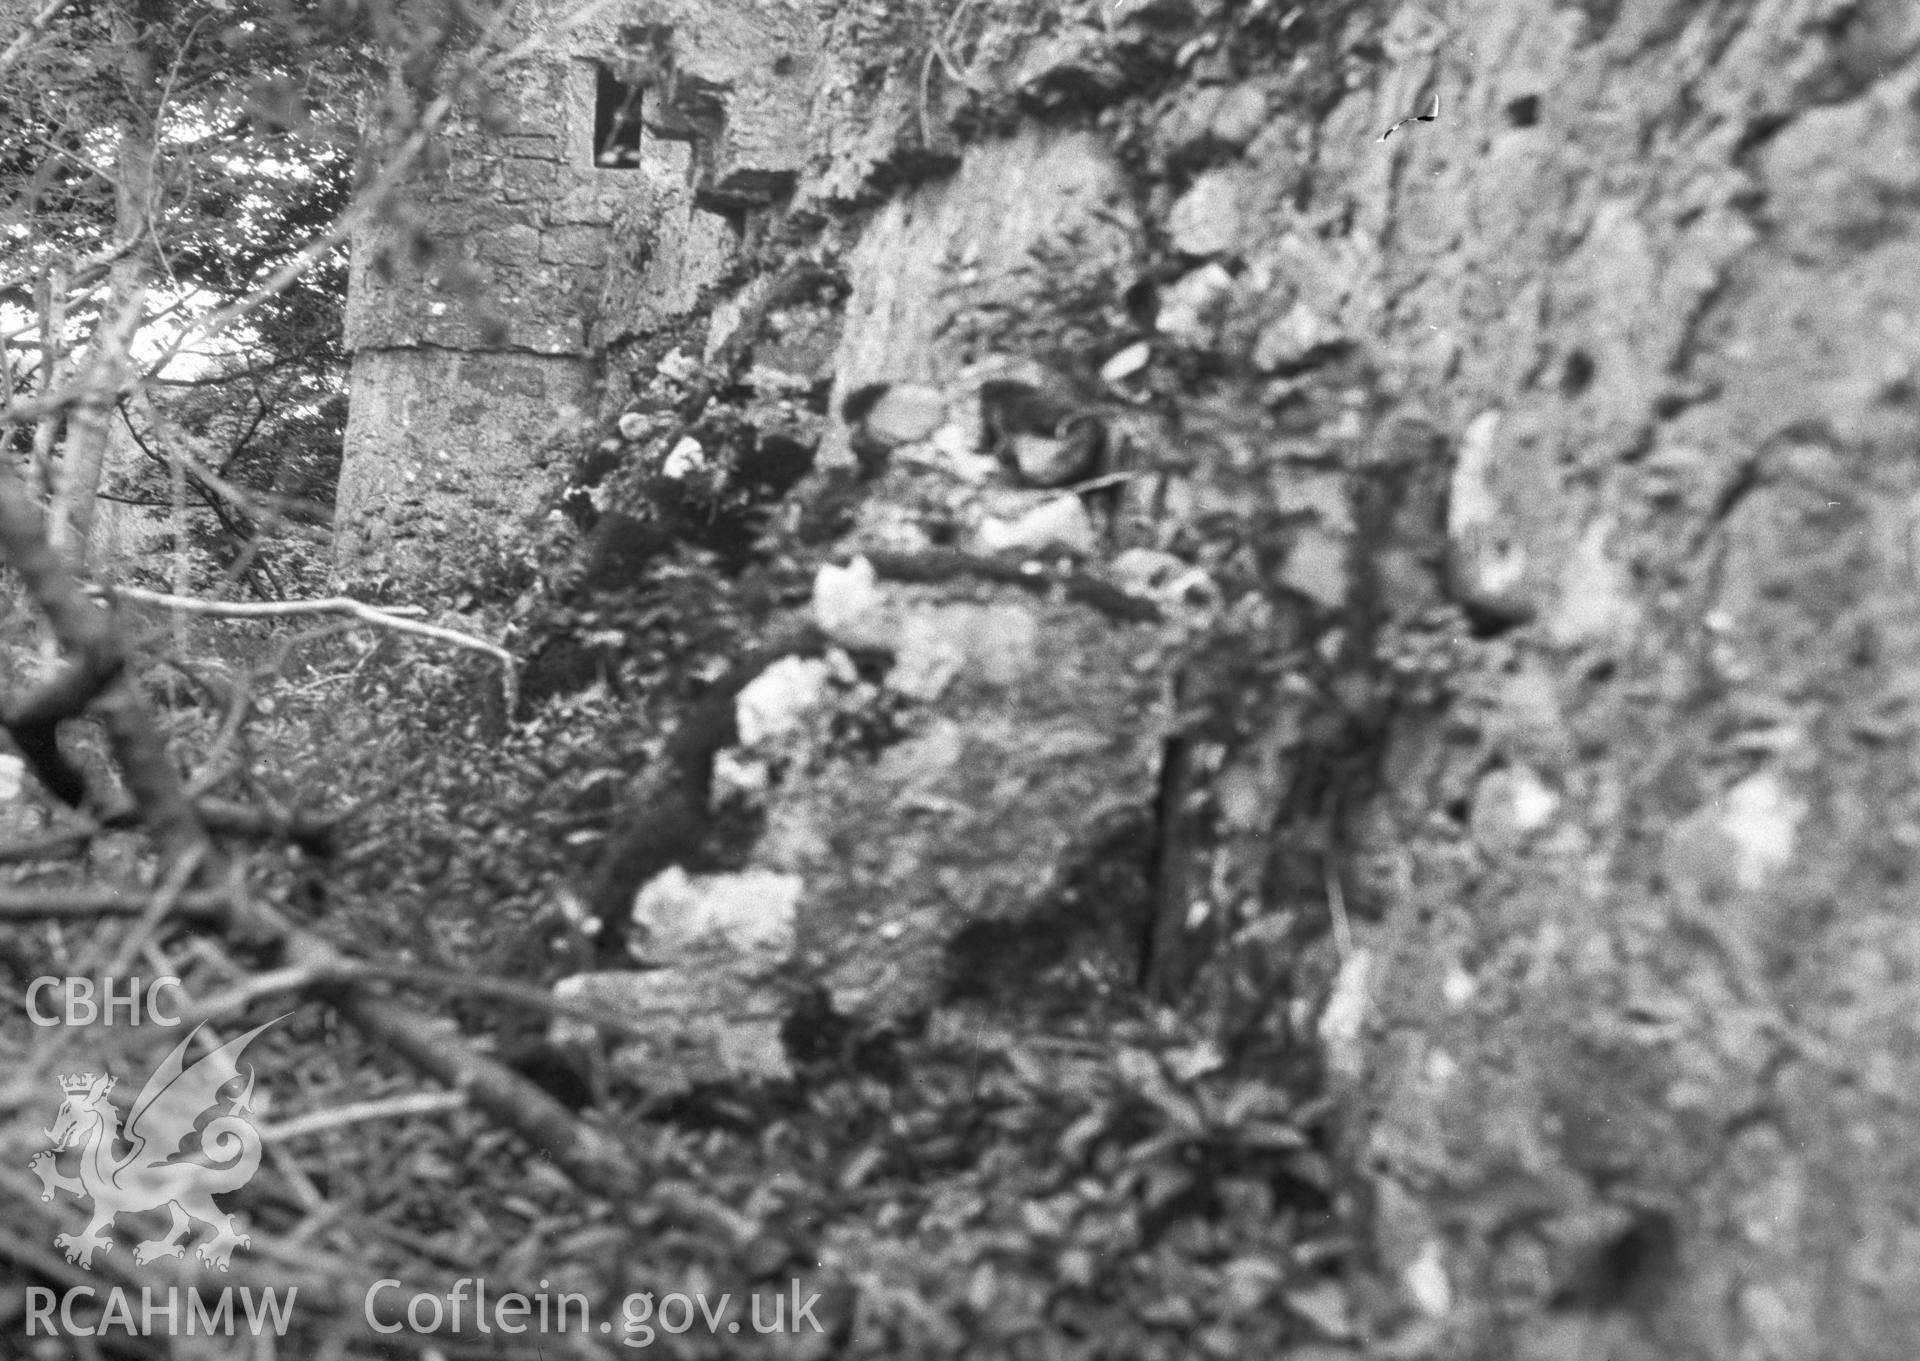 Digital copy of a nitrate negative showing Aber Lleingiog Castle. From Cadw Monuments in Care Collection.